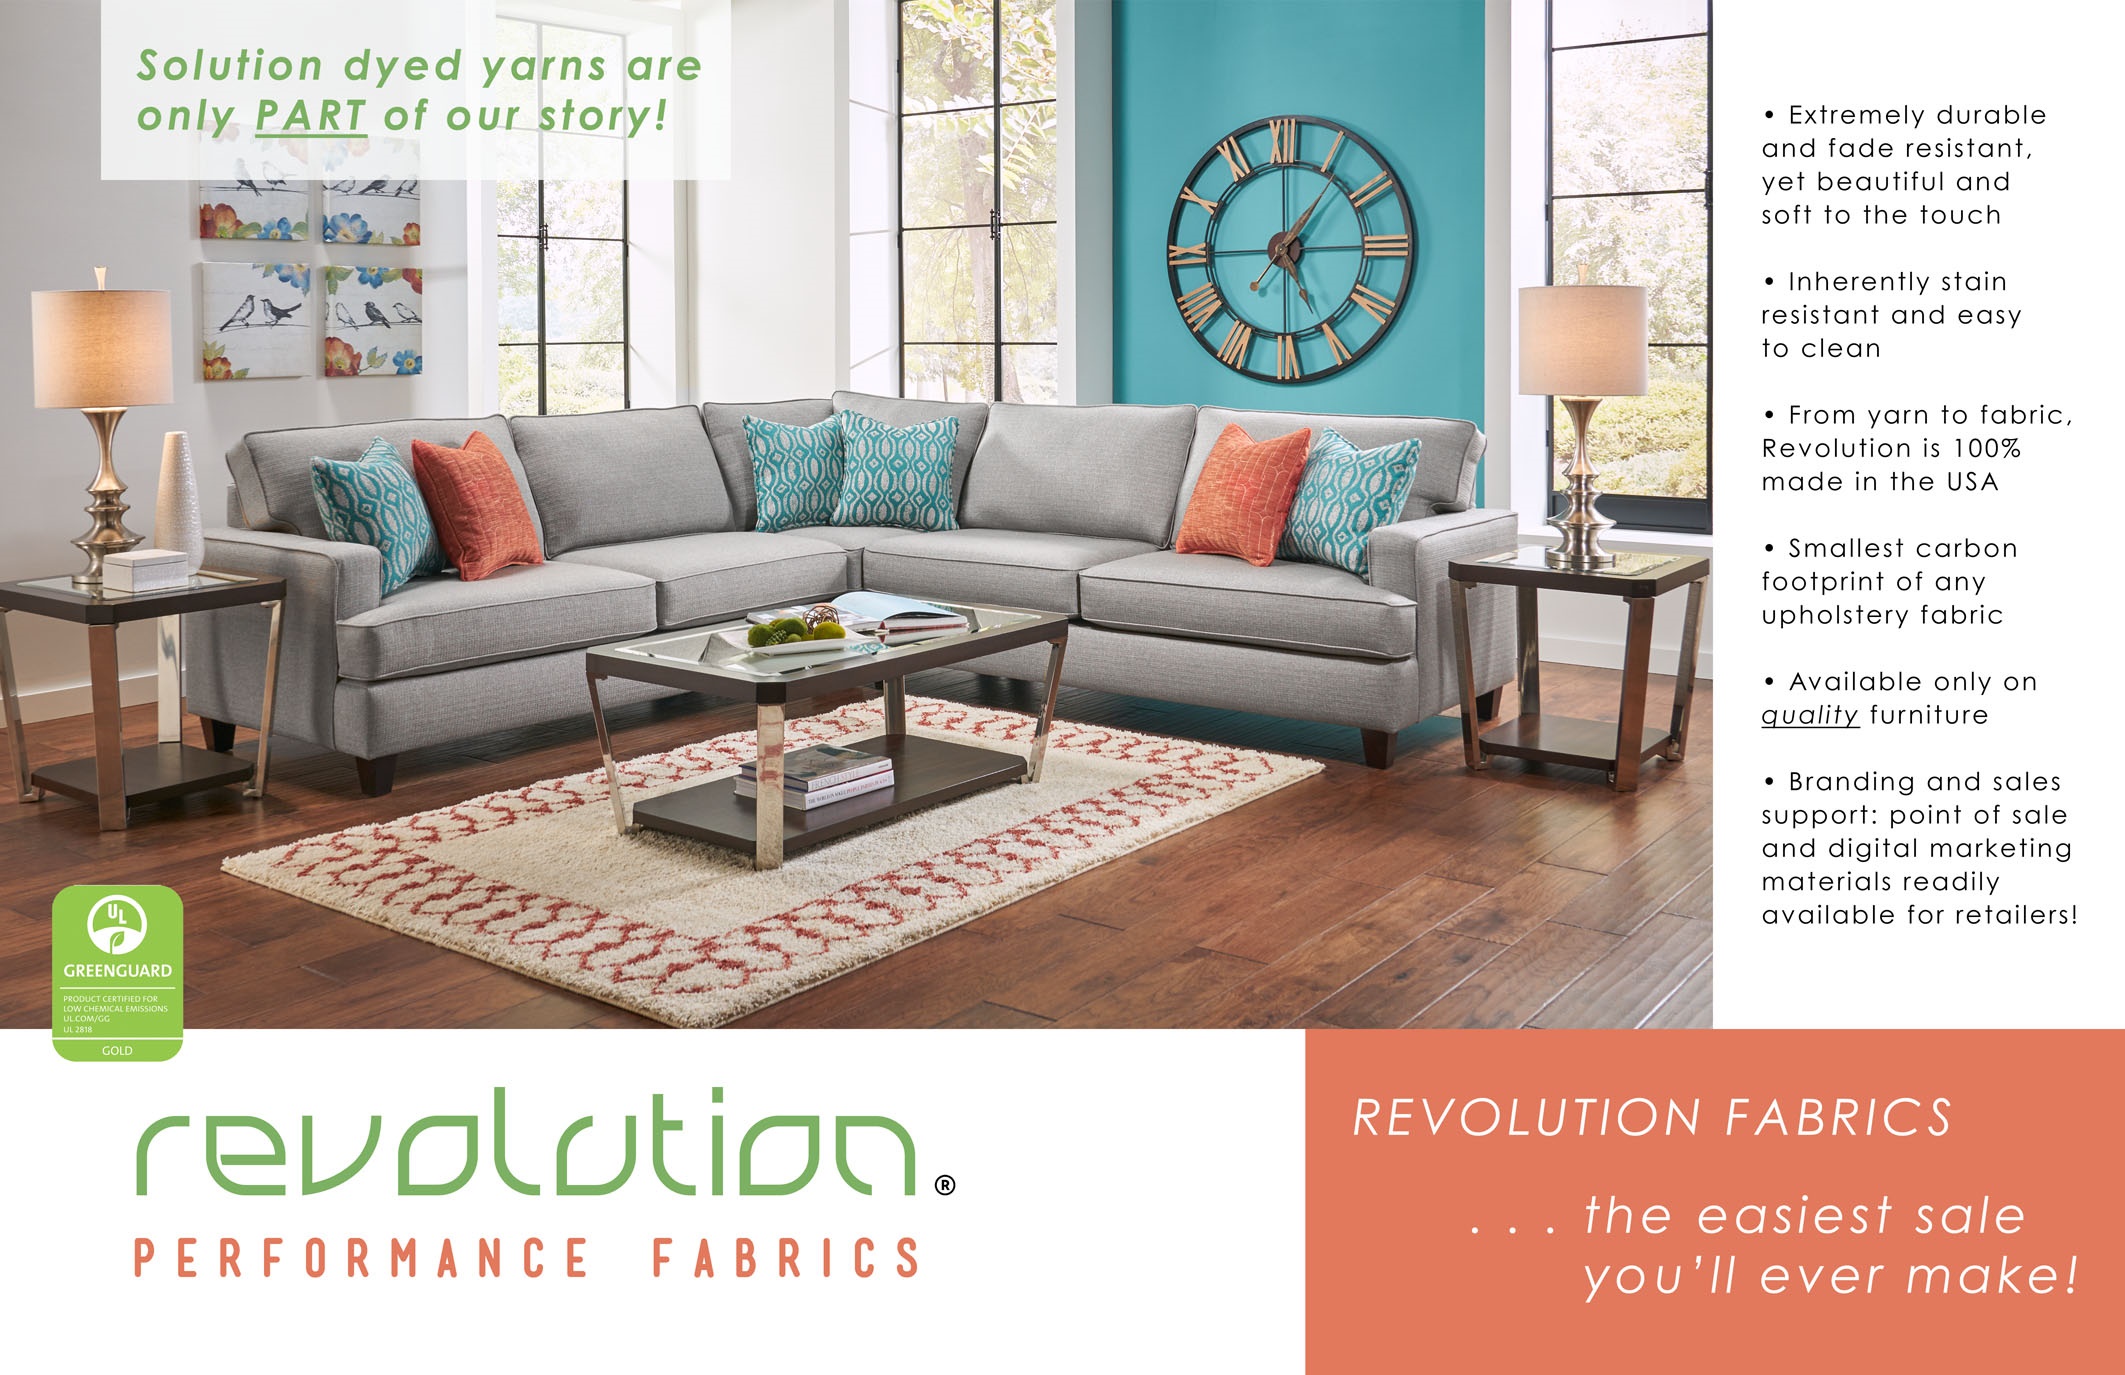 *A recent Revolution ad in Furniture Today